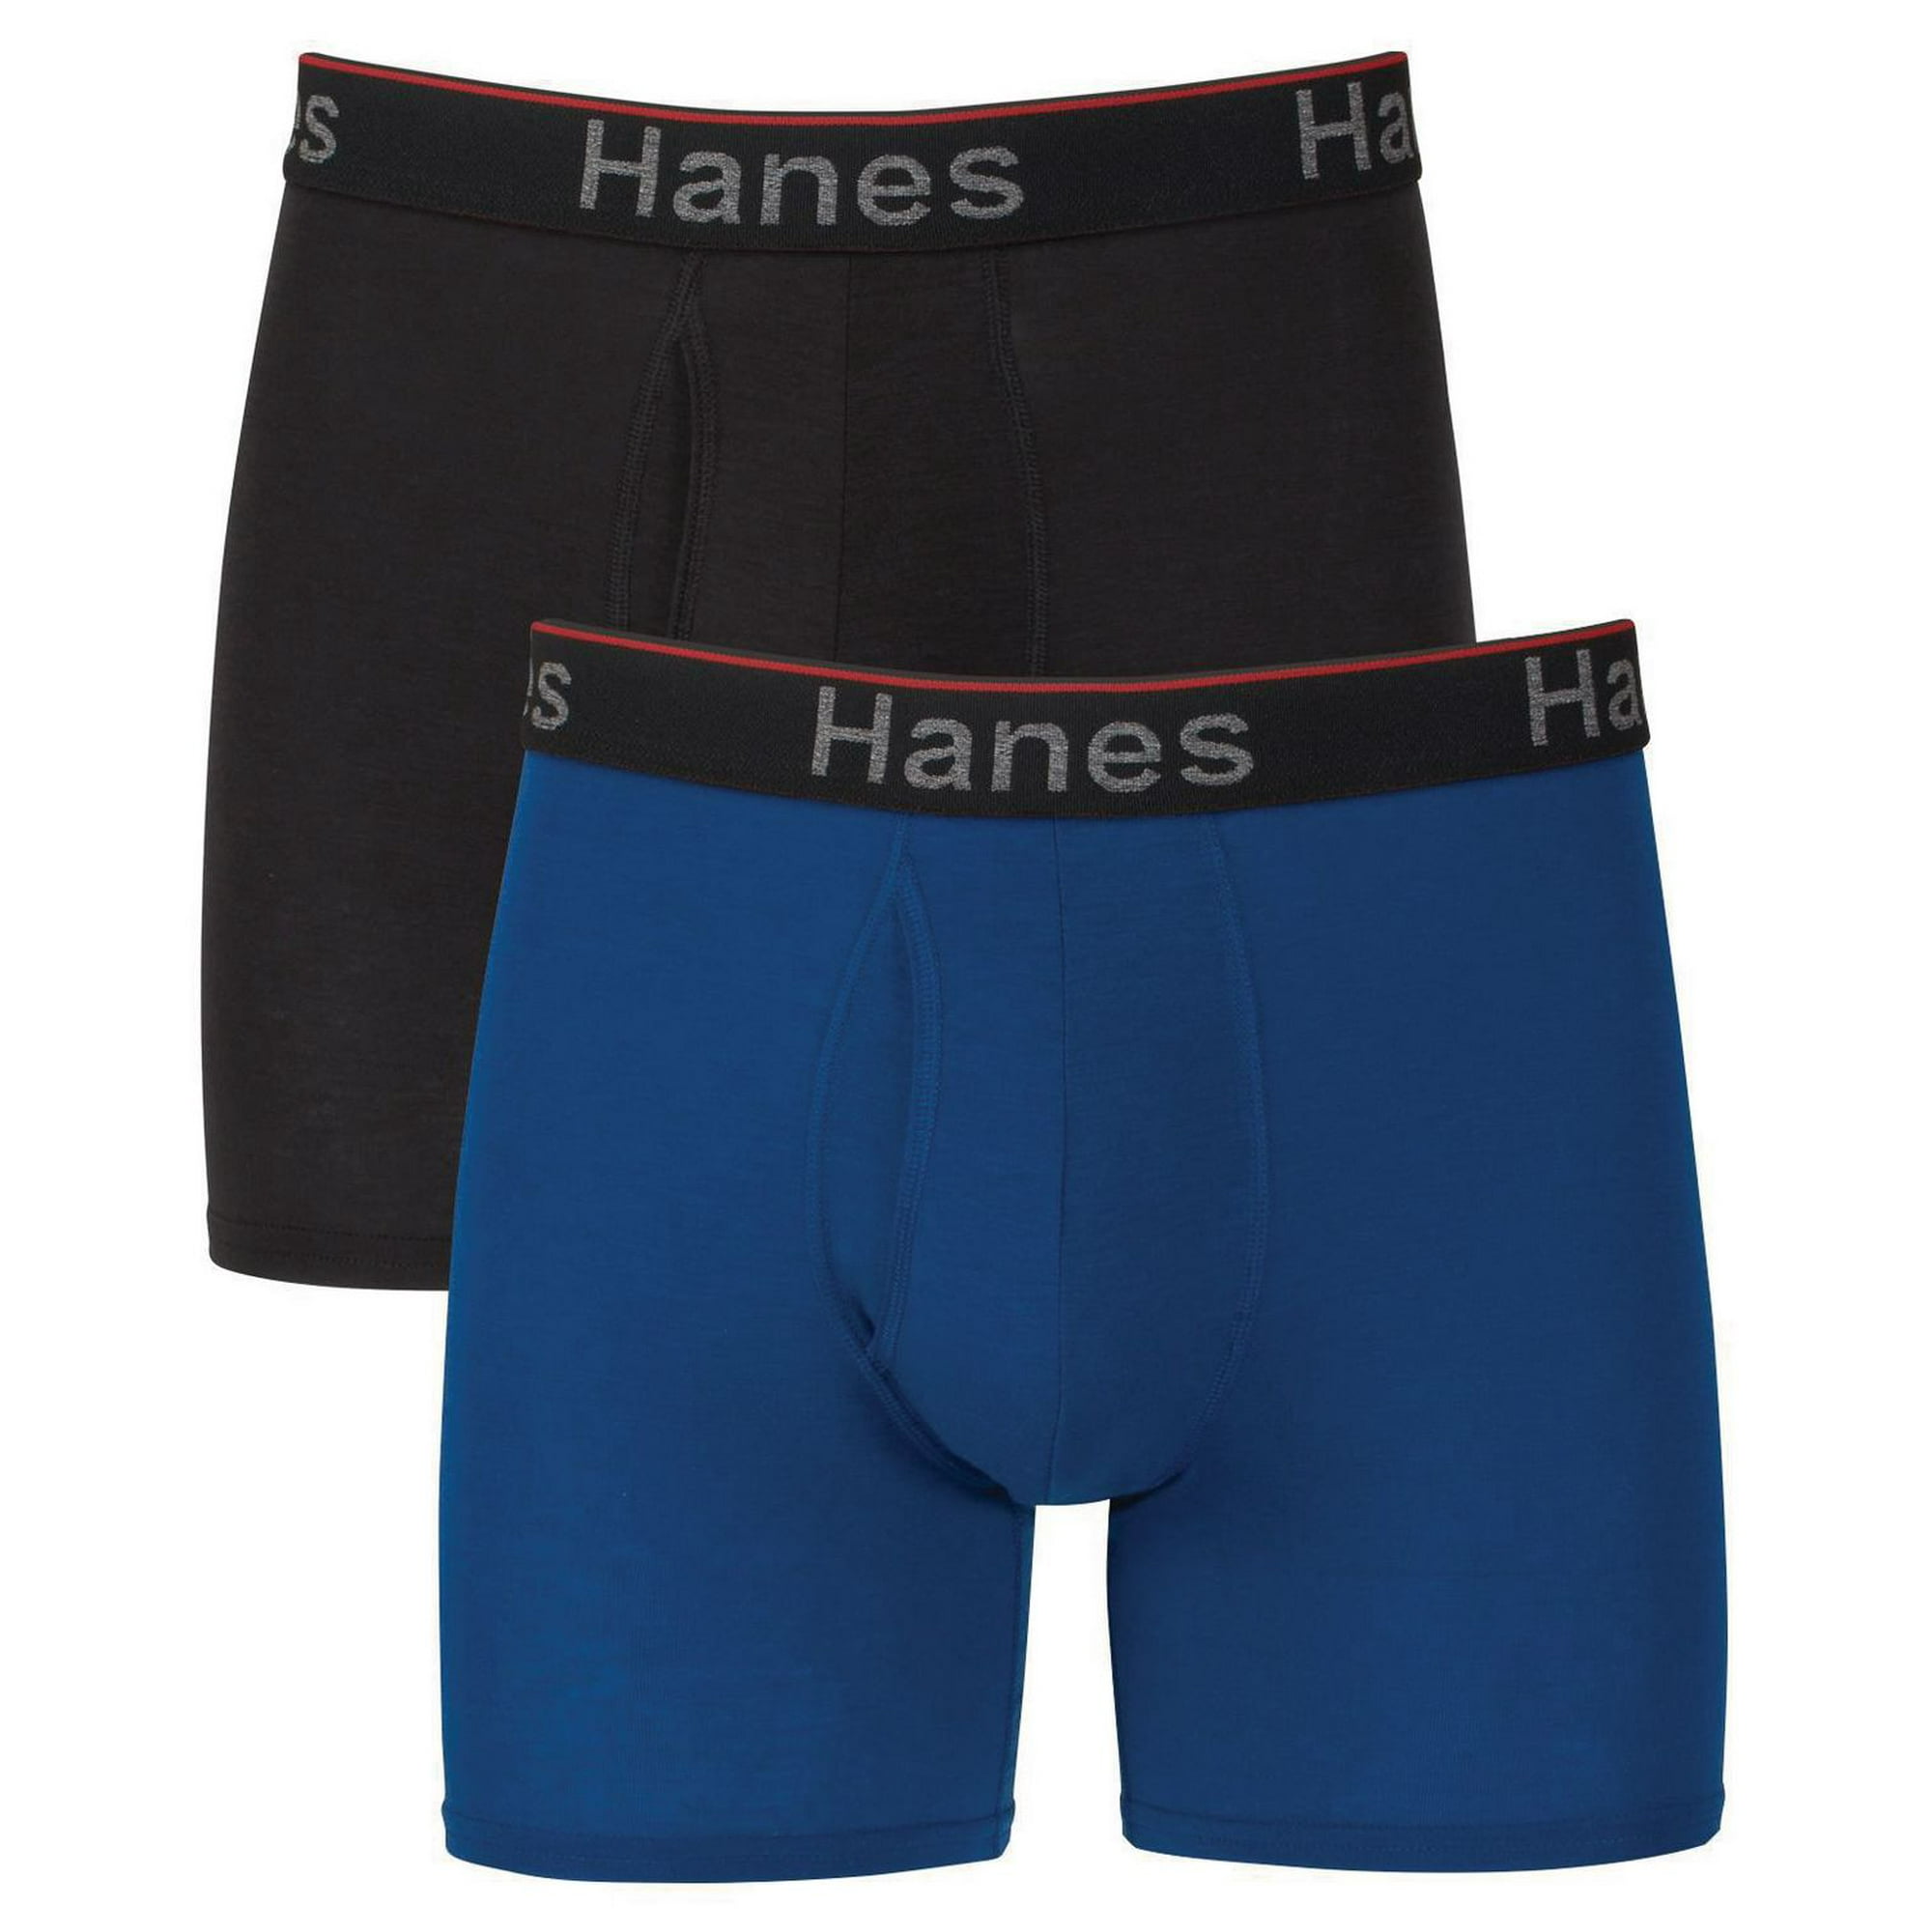 Hanes Red Label Briefs Size S - Pack of 9 - White for sale online